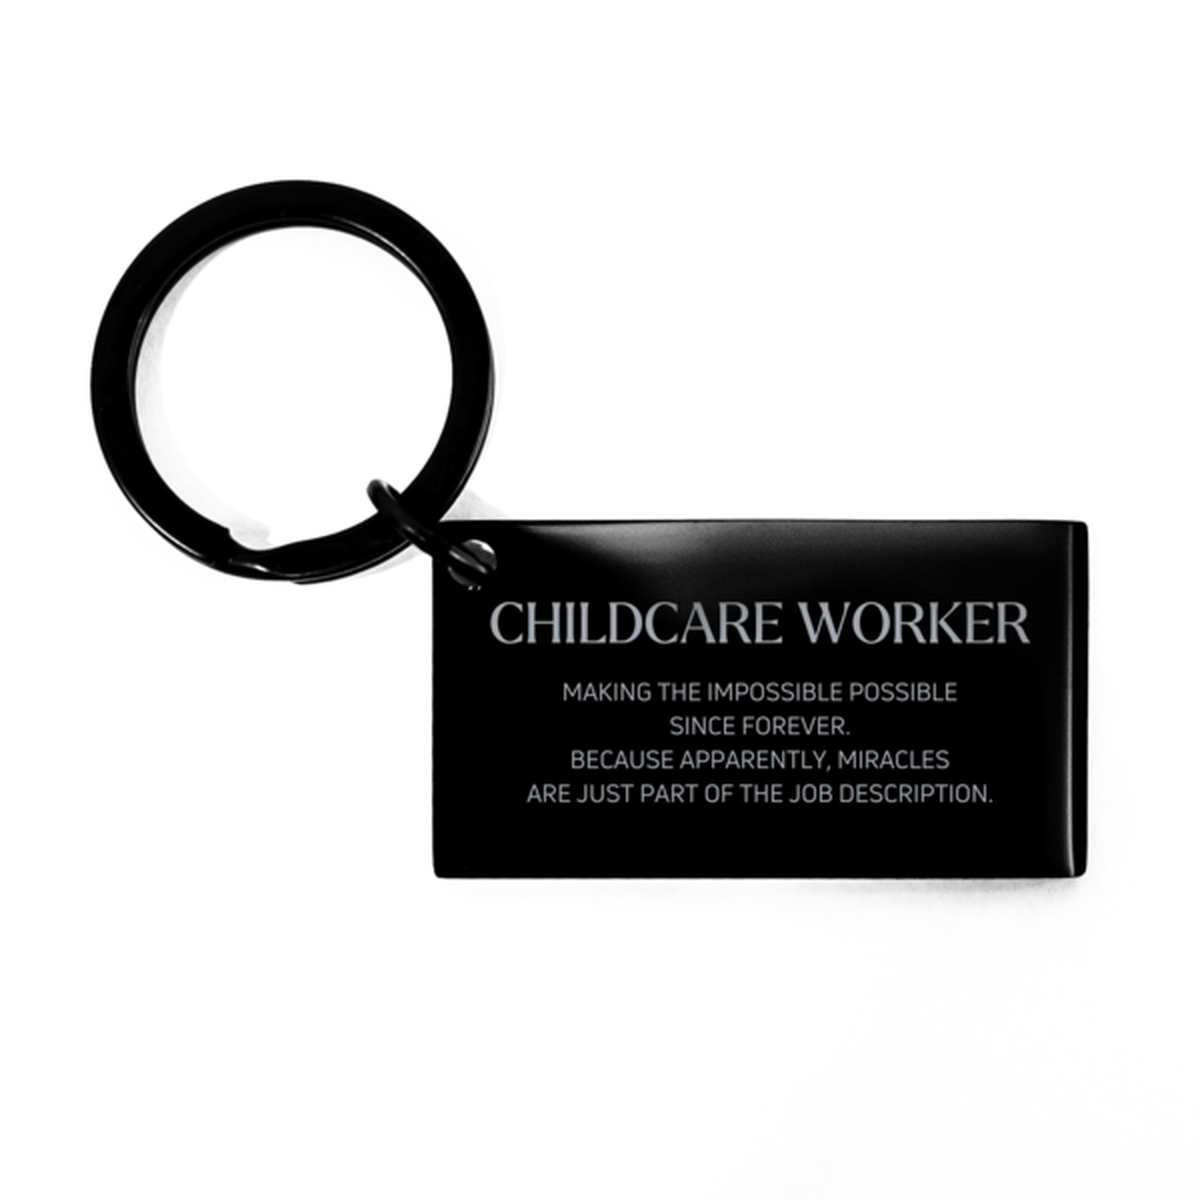 Funny Childcare Worker Gifts, Miracles are just part of the job description, Inspirational Birthday Keychain For Childcare Worker, Men, Women, Coworkers, Friends, Boss